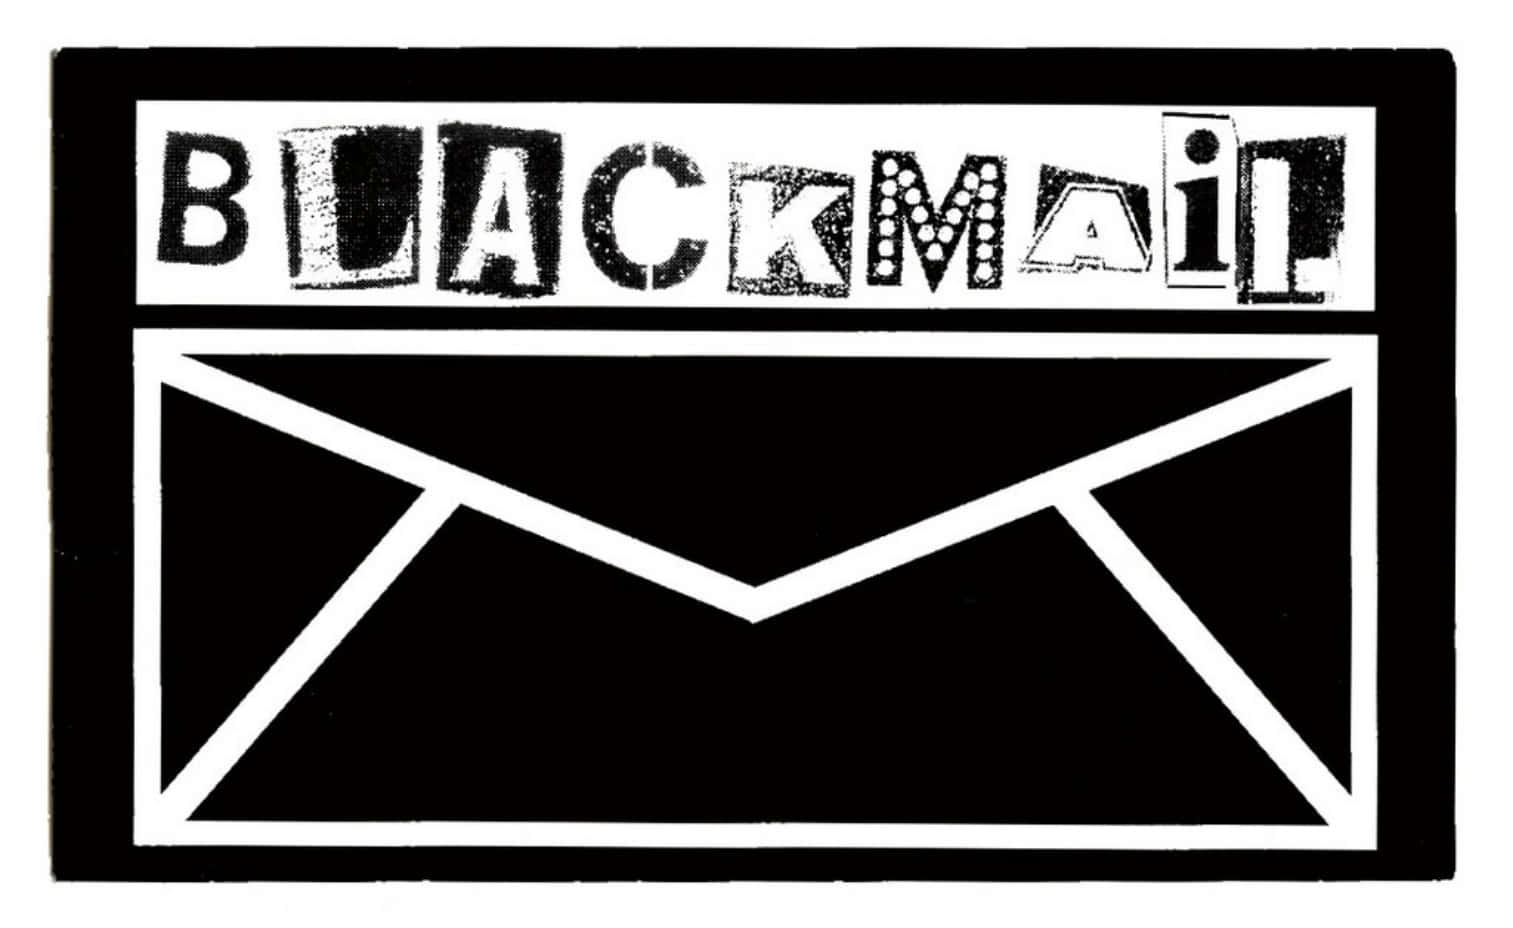 Blackmail: the ultimate tool of control and manipulation" Wallpaper